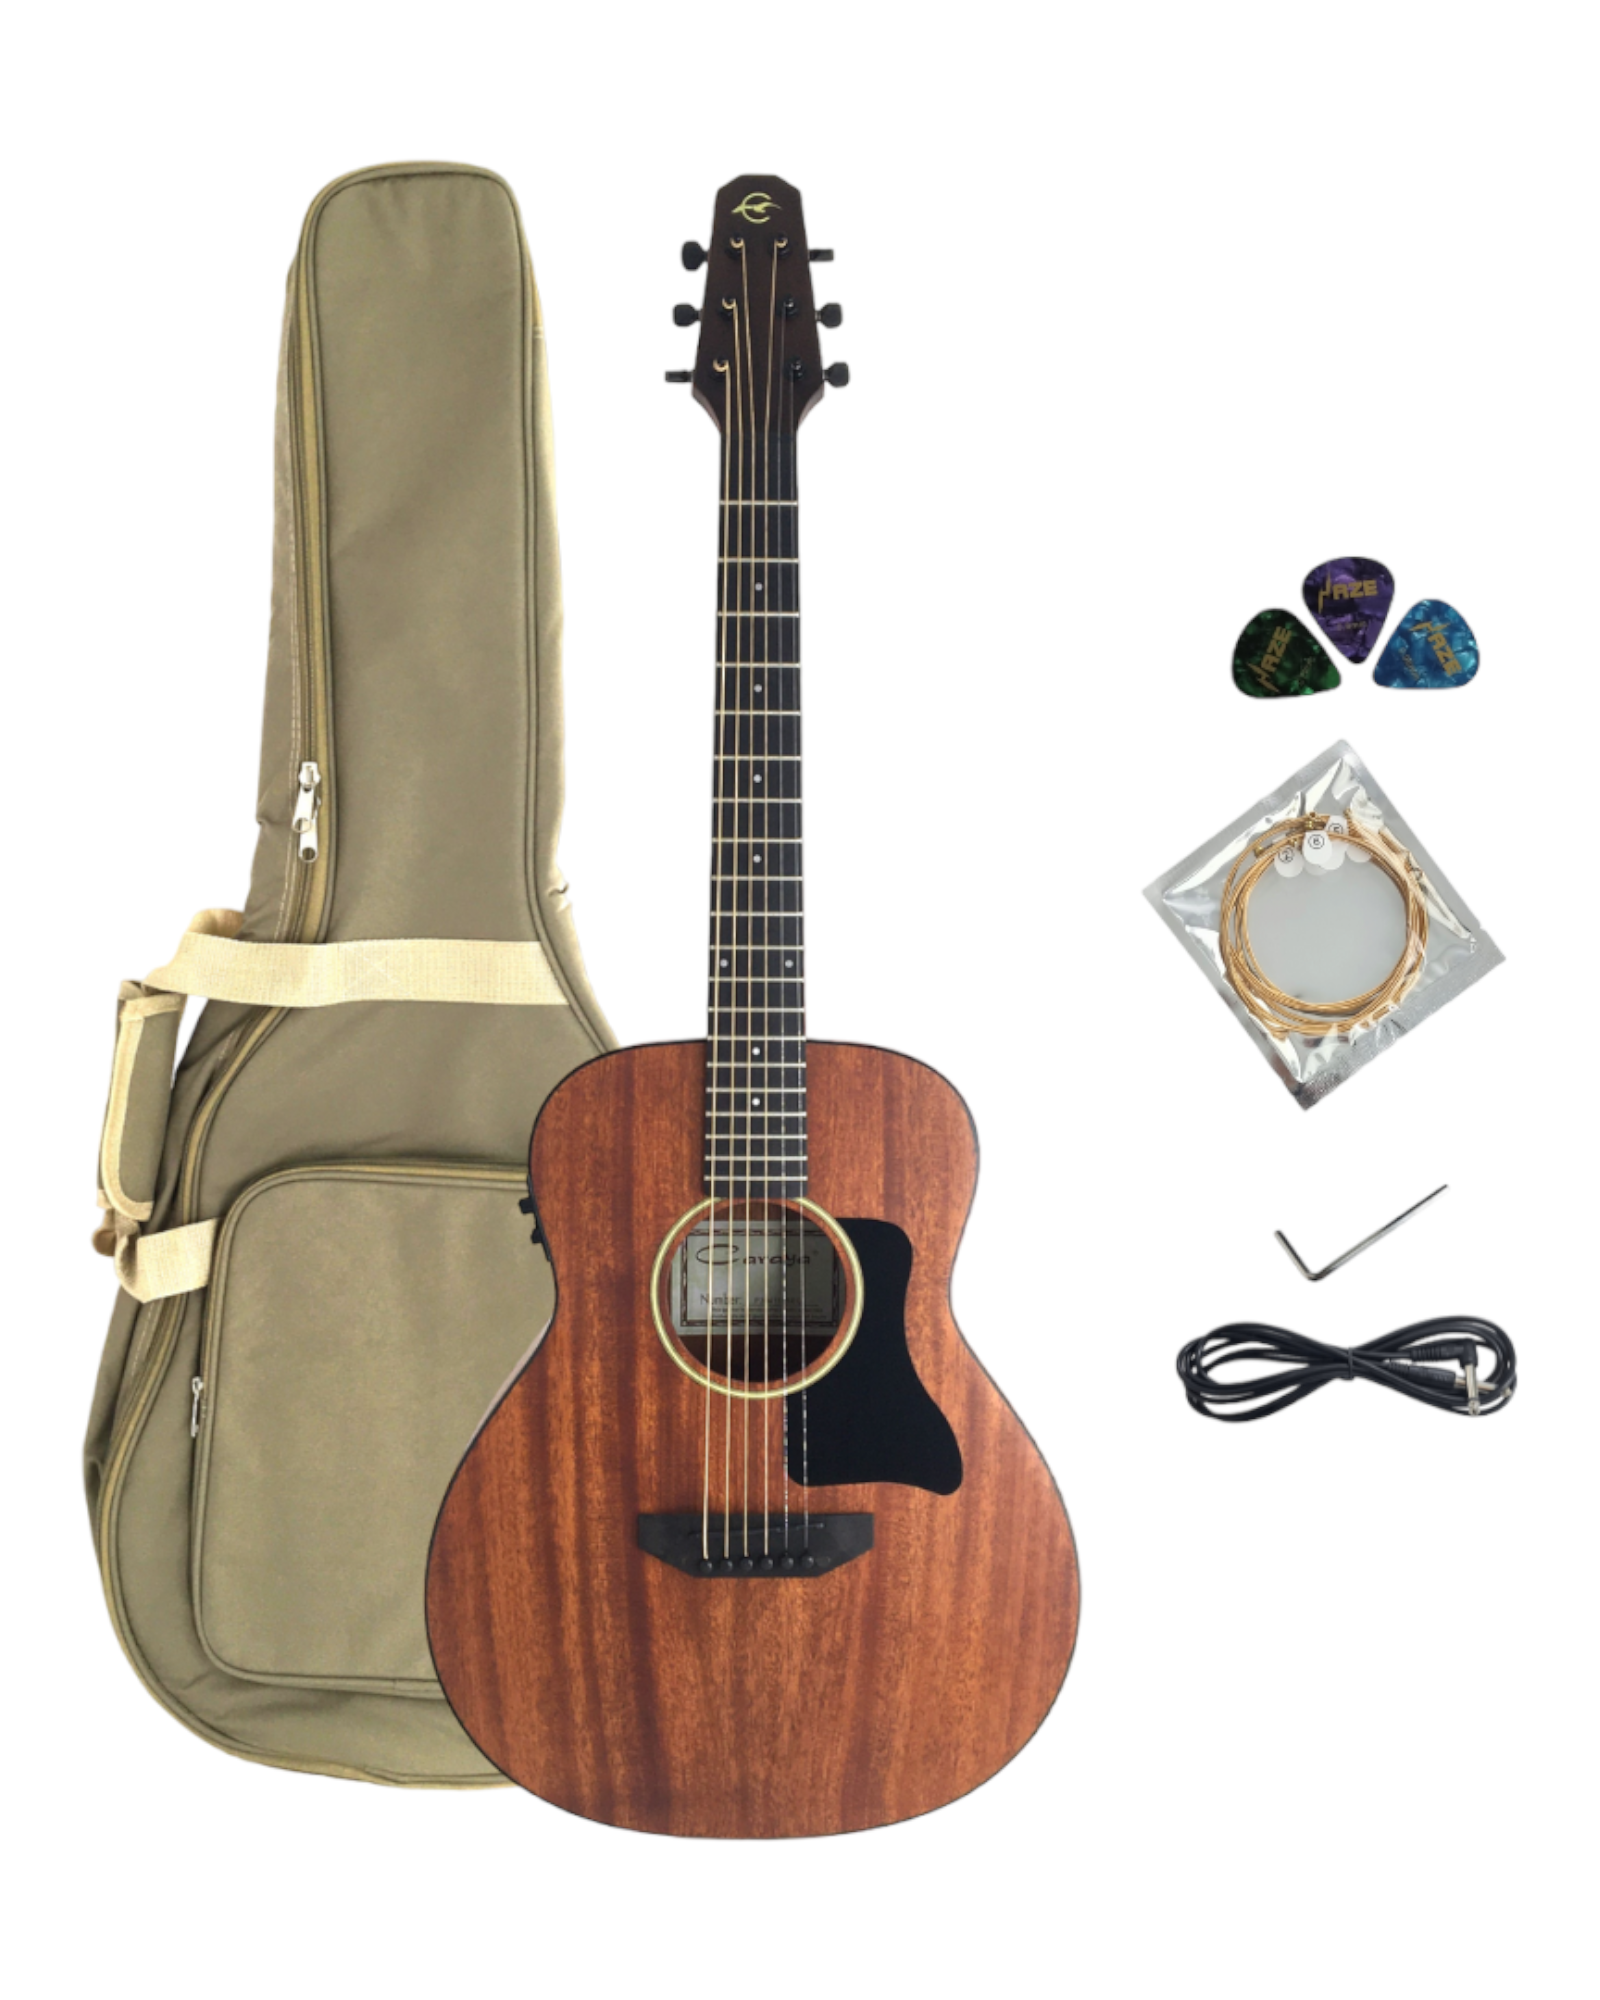 Caraya Acoustic Guitars for sale in the USA